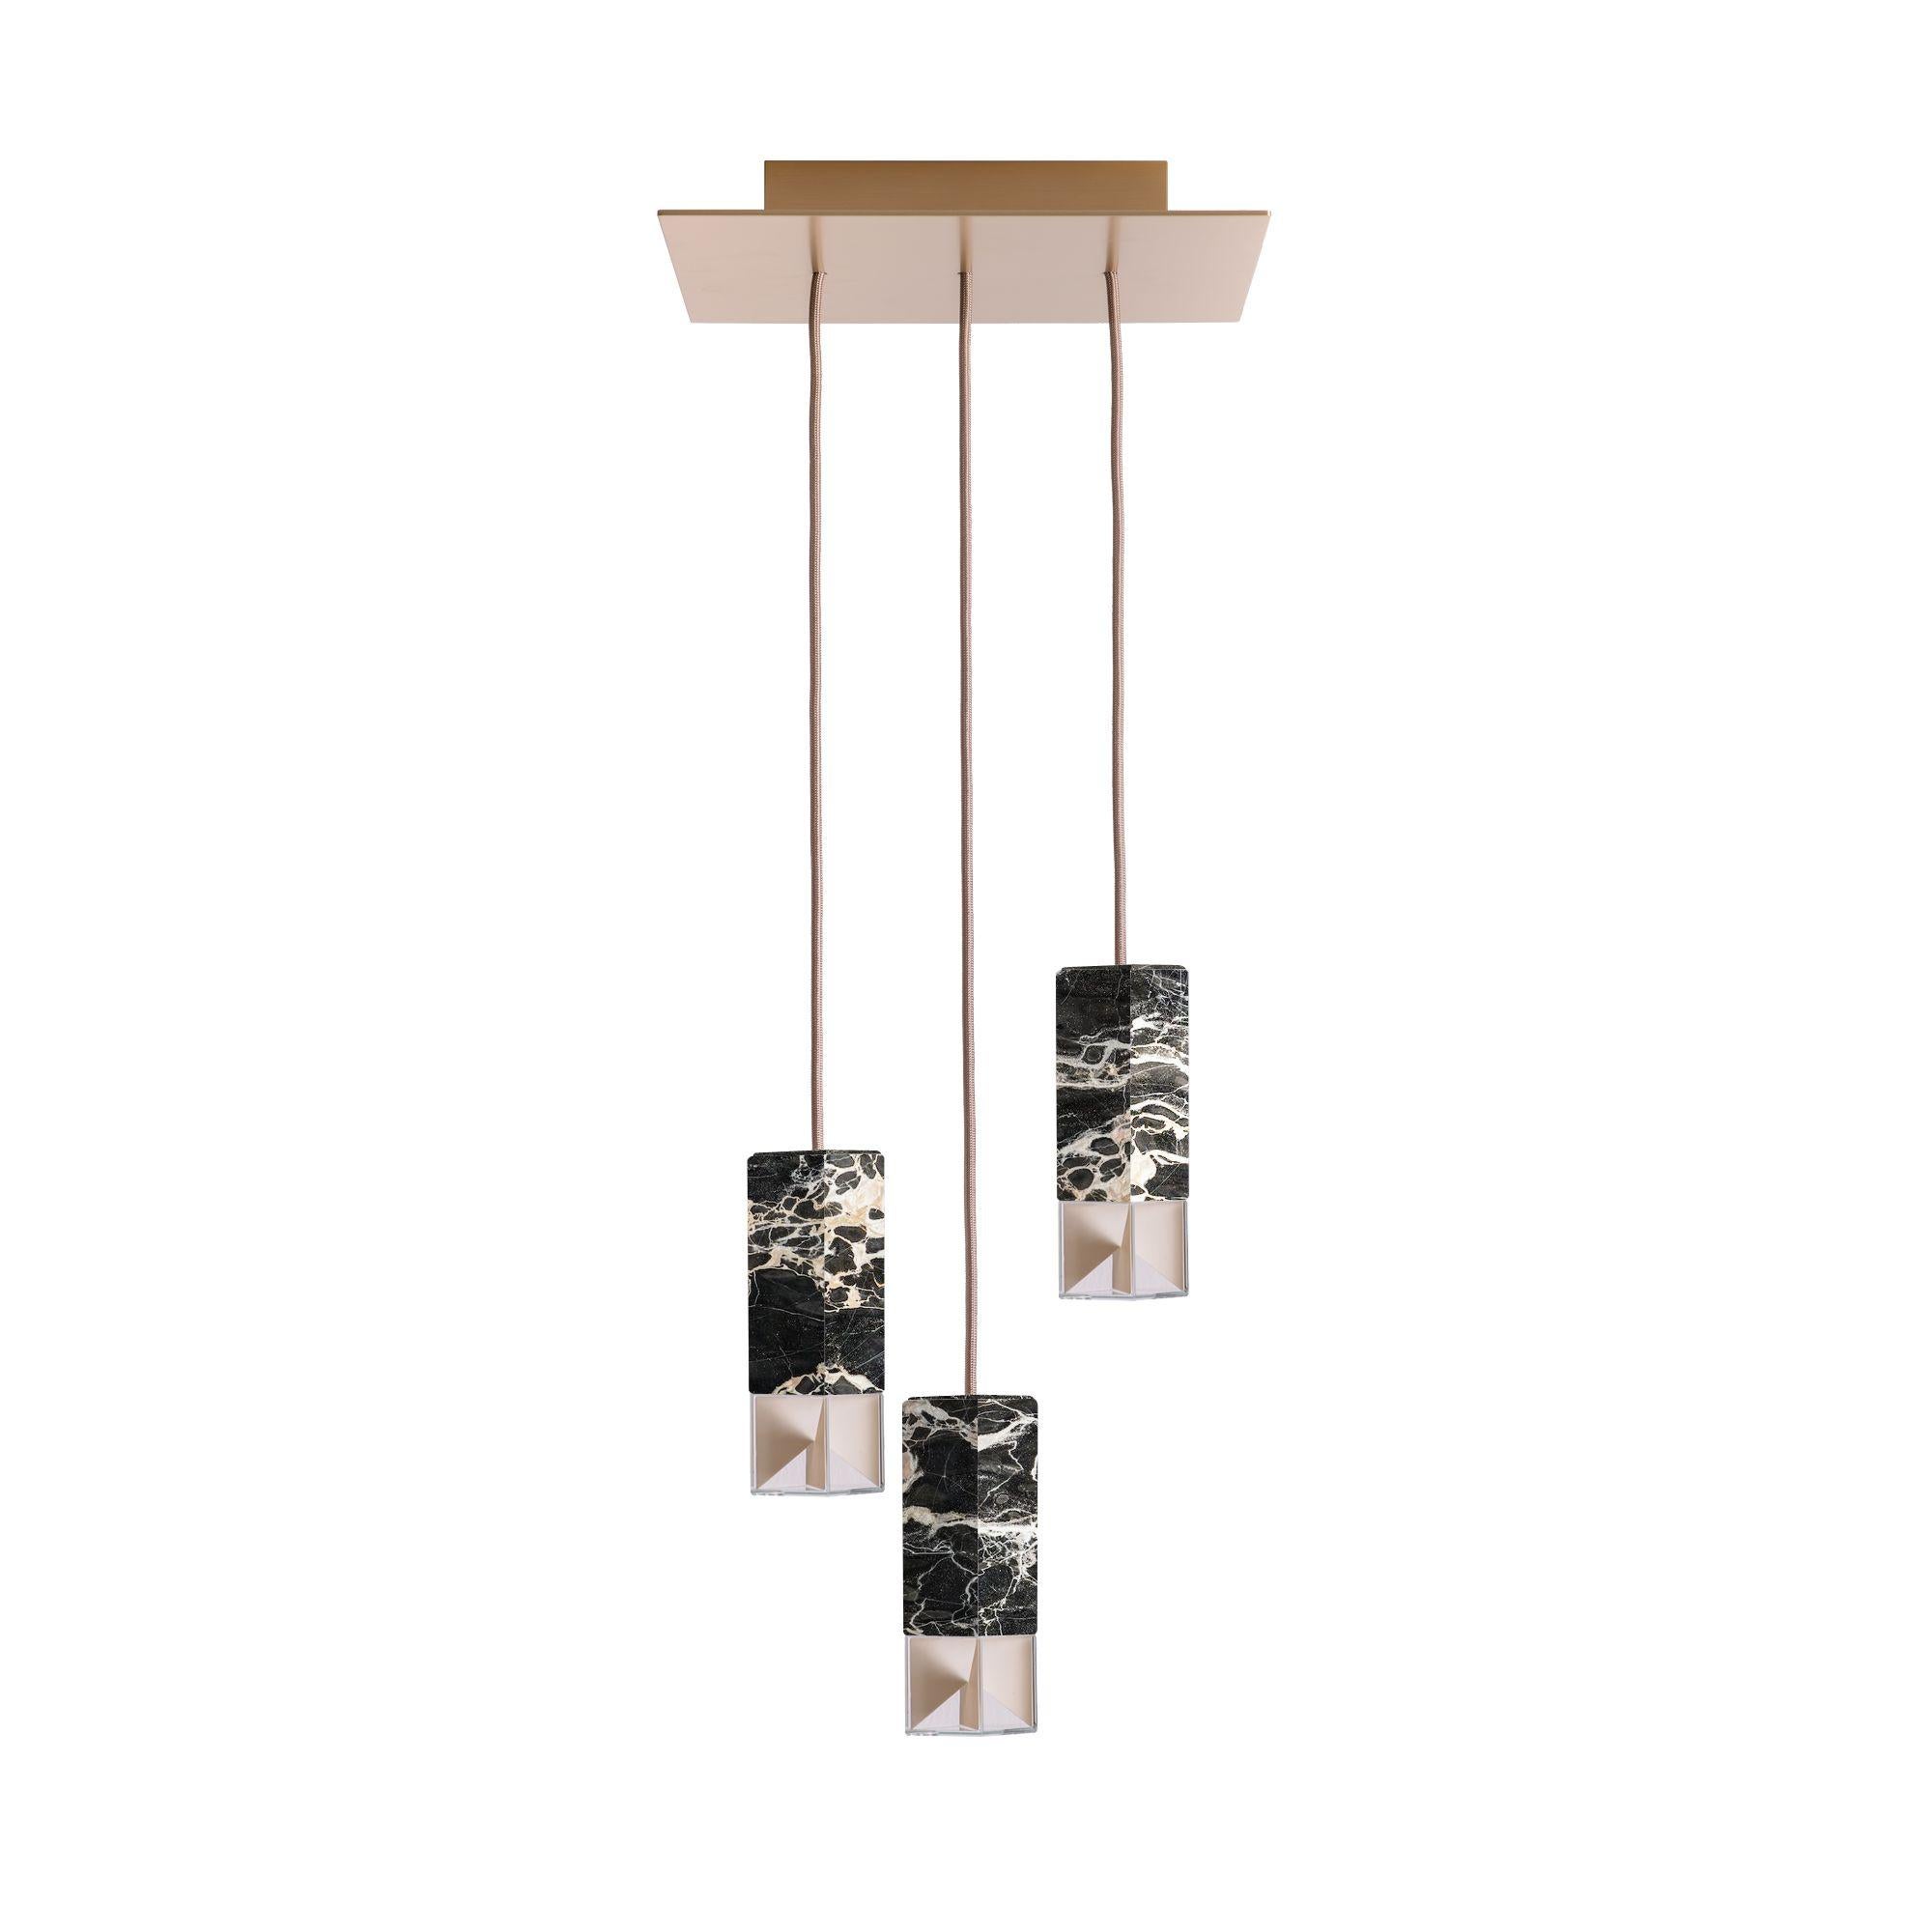 Lamp one 6-light chandelier in black marble by Formaminima
Dimensions: H 93 x 30 x 30 cm
Materials: Marble

Ultra-thin anti-reflection crystal diffuser
Inside-diffuser Limoges biscuit-finish porcelain sheets
Satin brass ceiling rose H 30 300 x